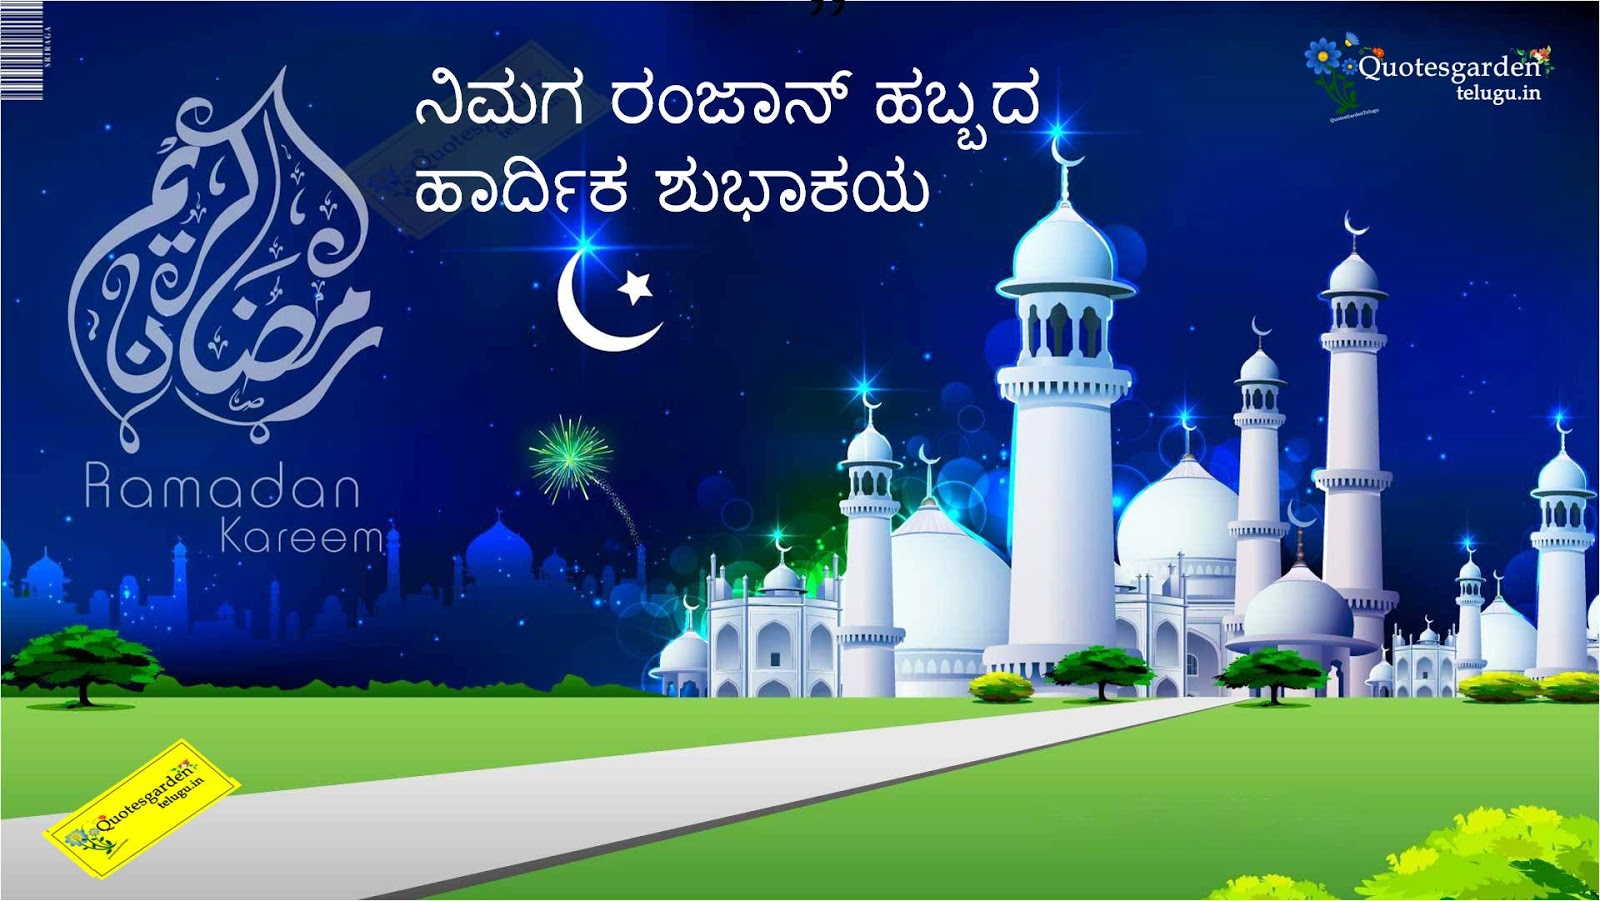 Ramzan Greetings wishes wallpapers images photoes pictures eid mubarak in  kannada | QUOTES GARDEN TELUGU | Telugu Quotes | English Quotes | Hindi  Quotes |